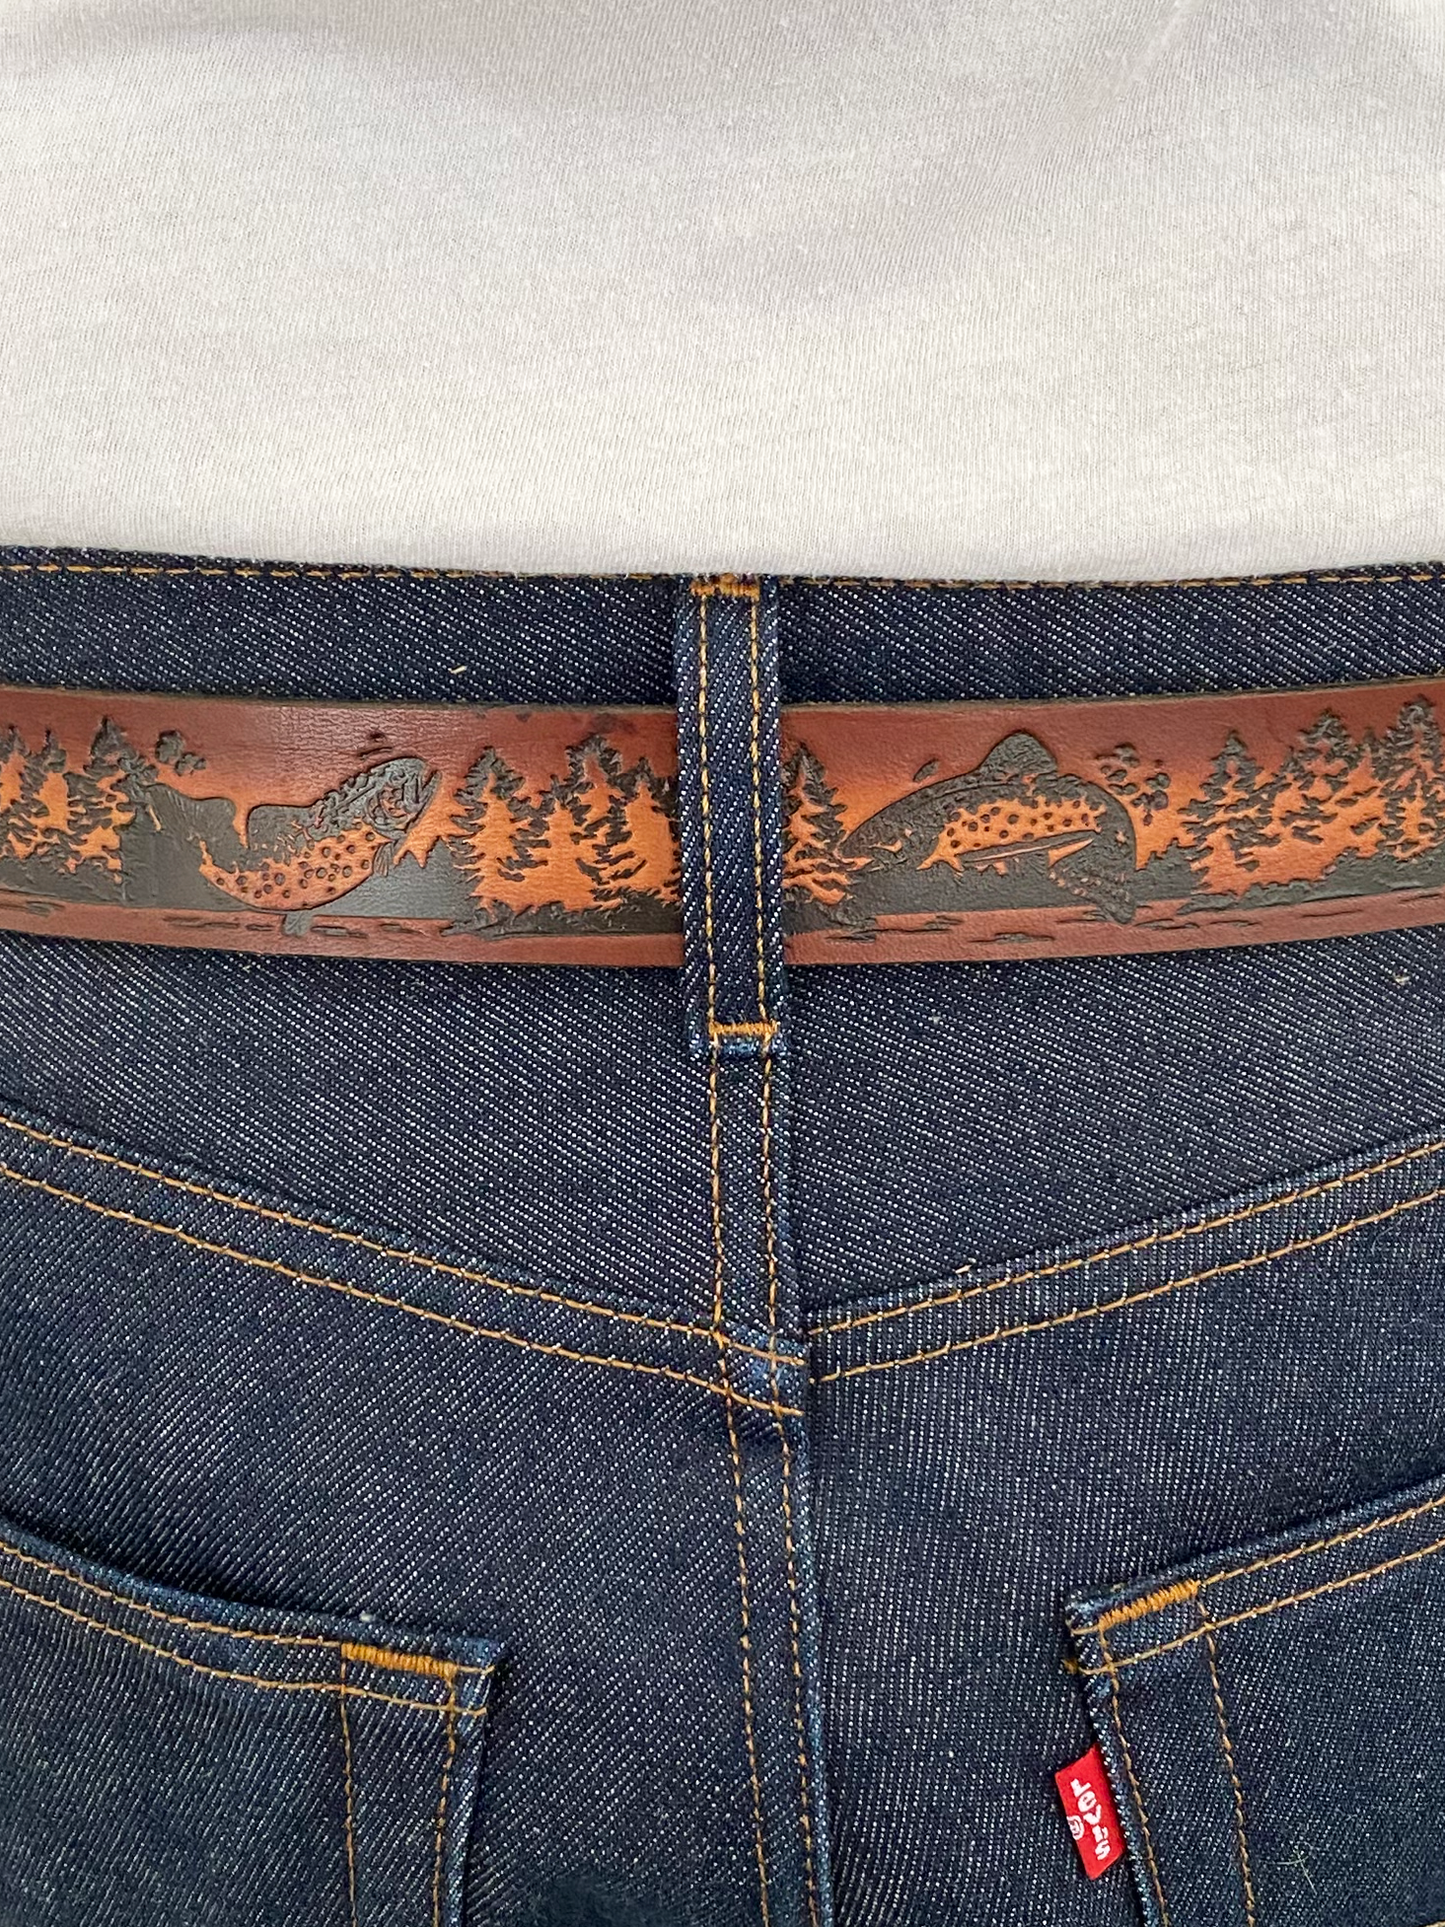 Animals of the Wild Patterned Leather Belt